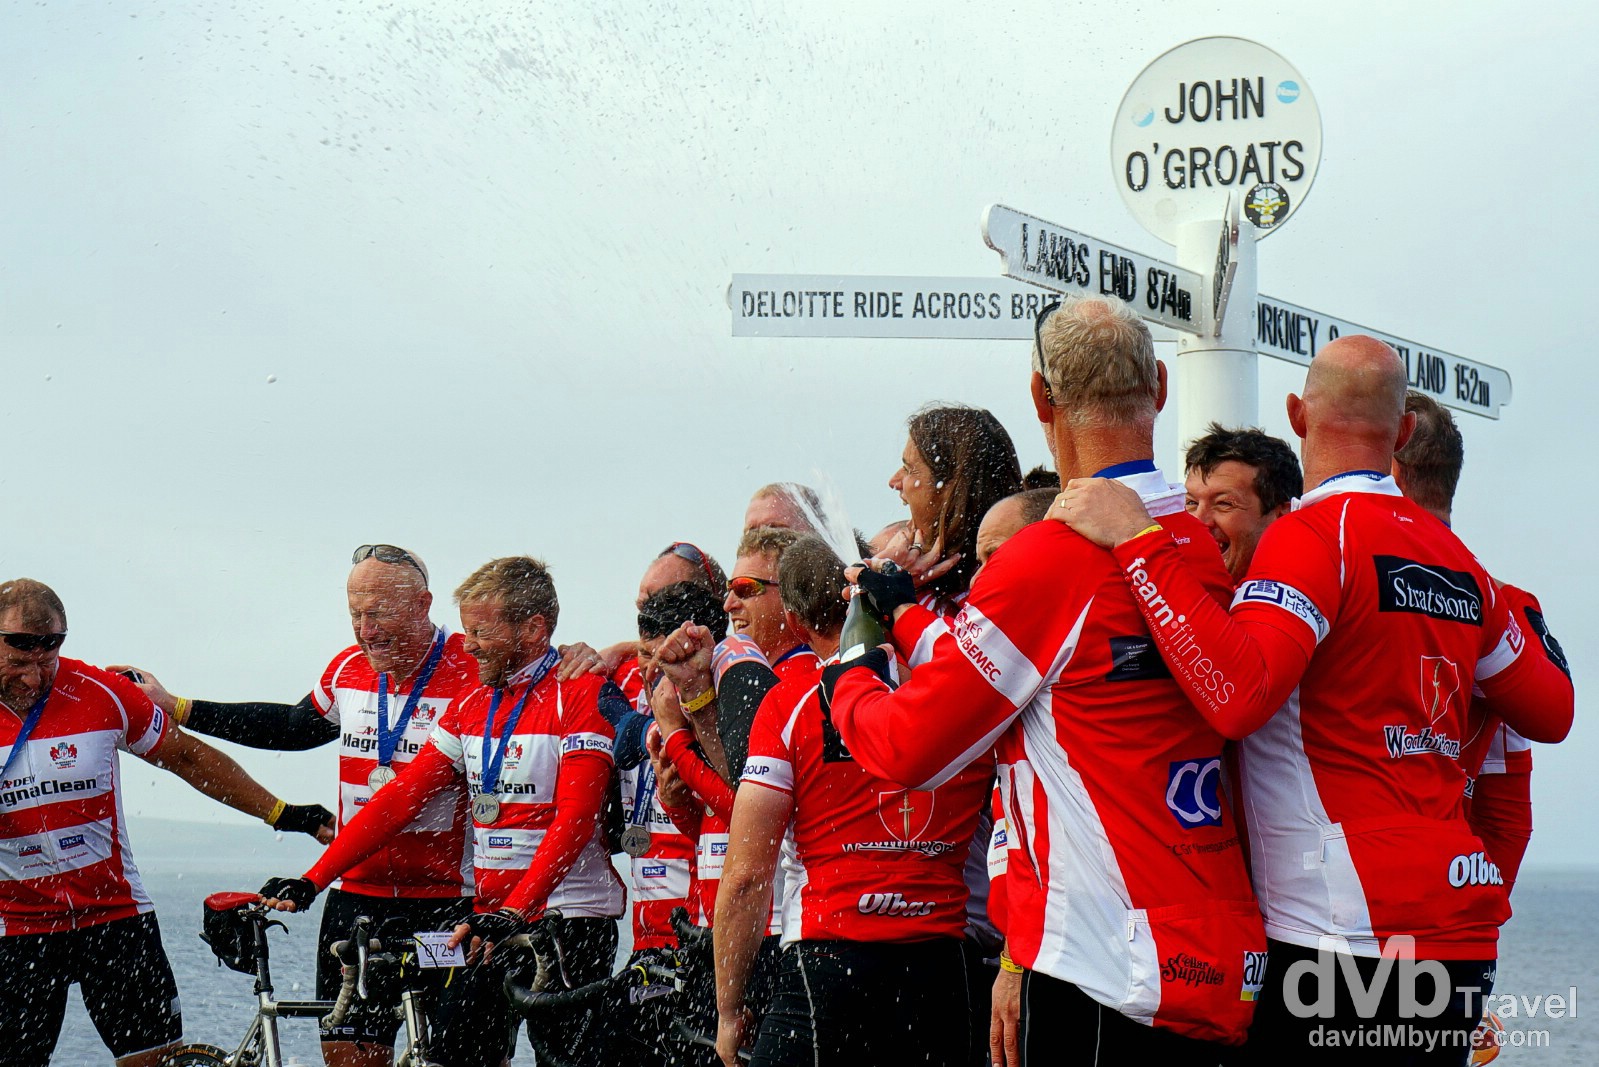 Deloitte Ride Across Britain 2014 participants celebrate completing the 9-day, 874 mile cycle from Land's End by the post at John O'Groats in Scotland. September 14, 2014.